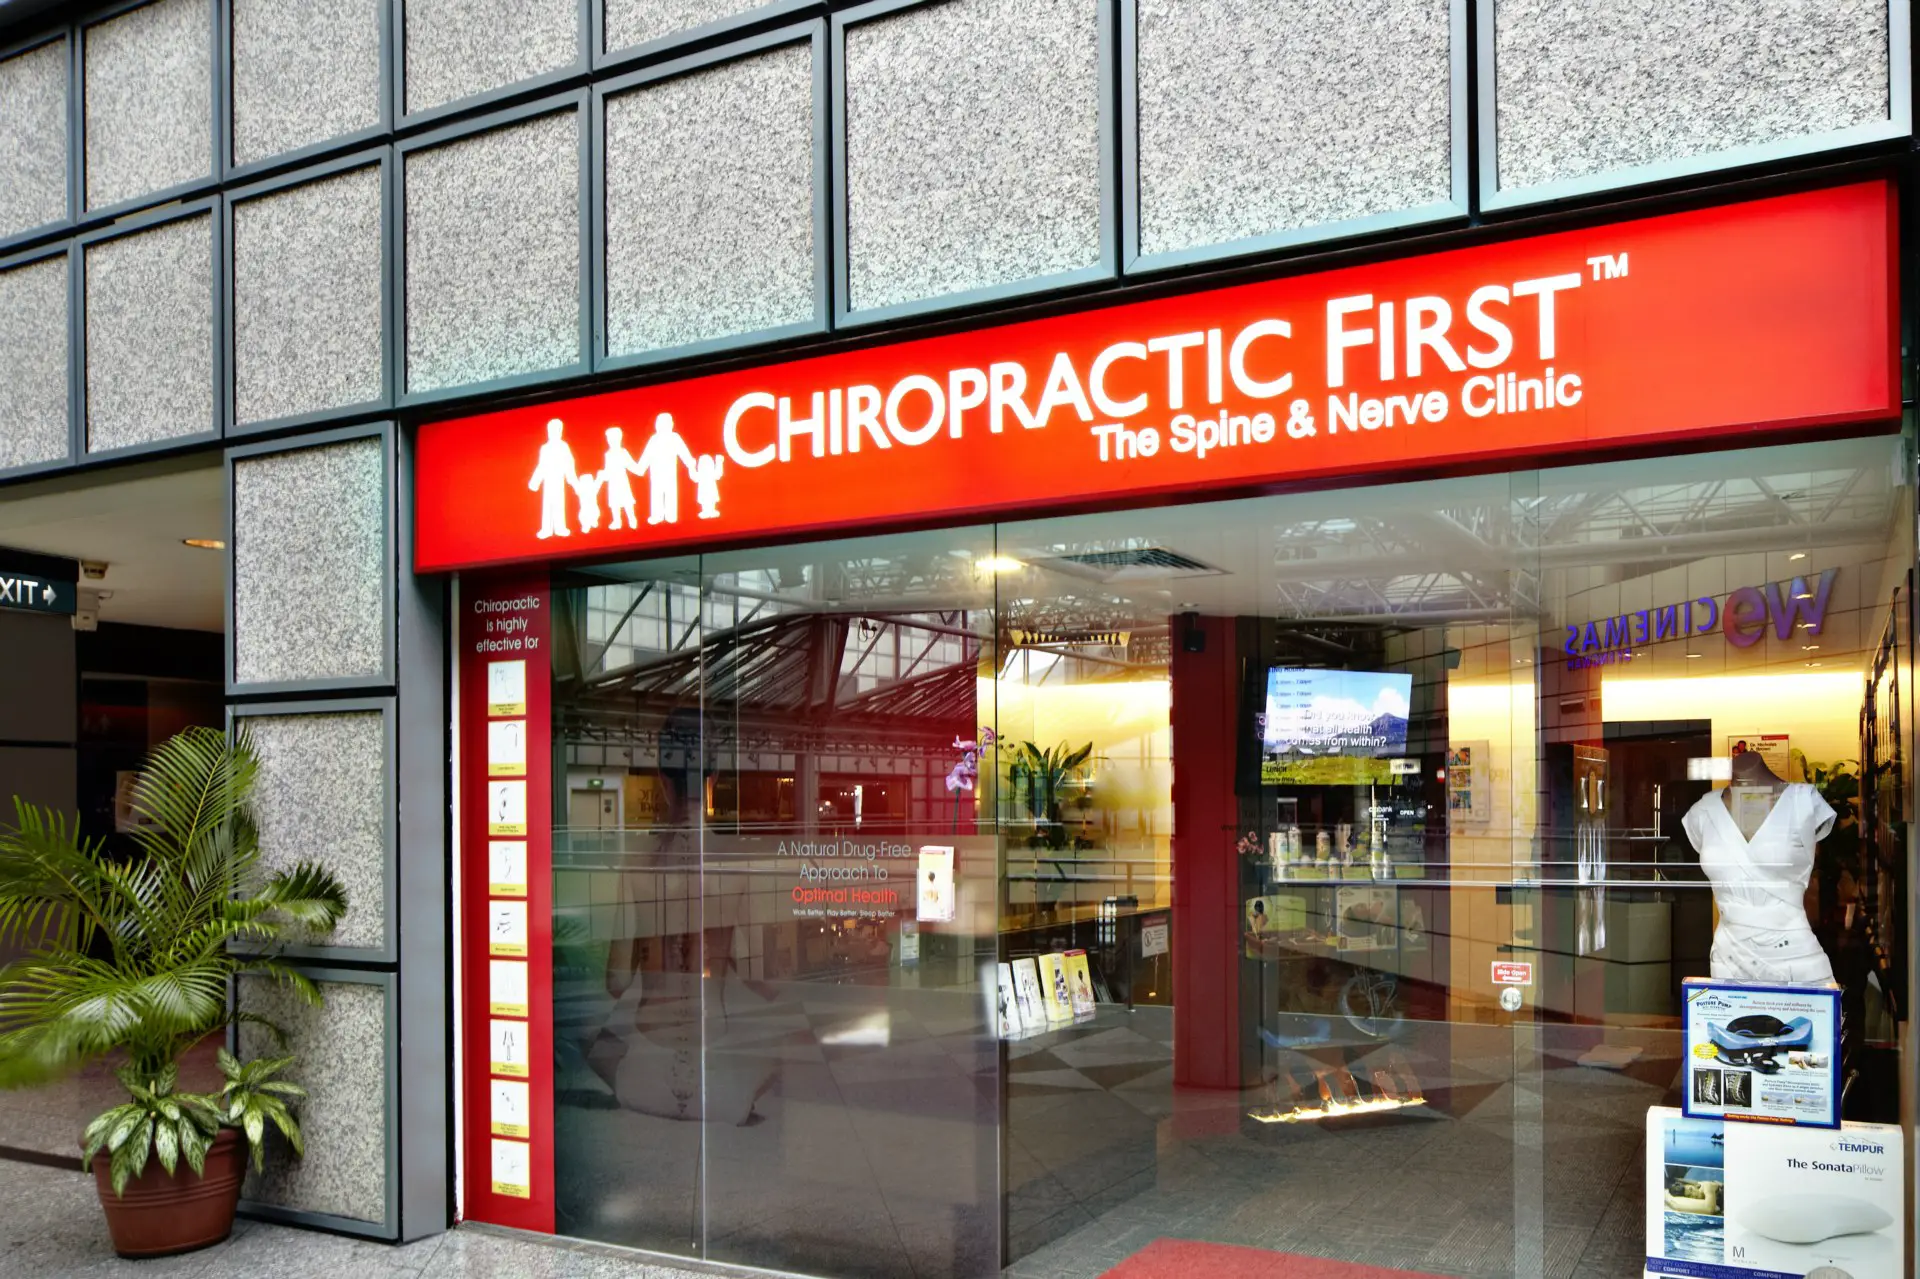 Chiropractic First Group